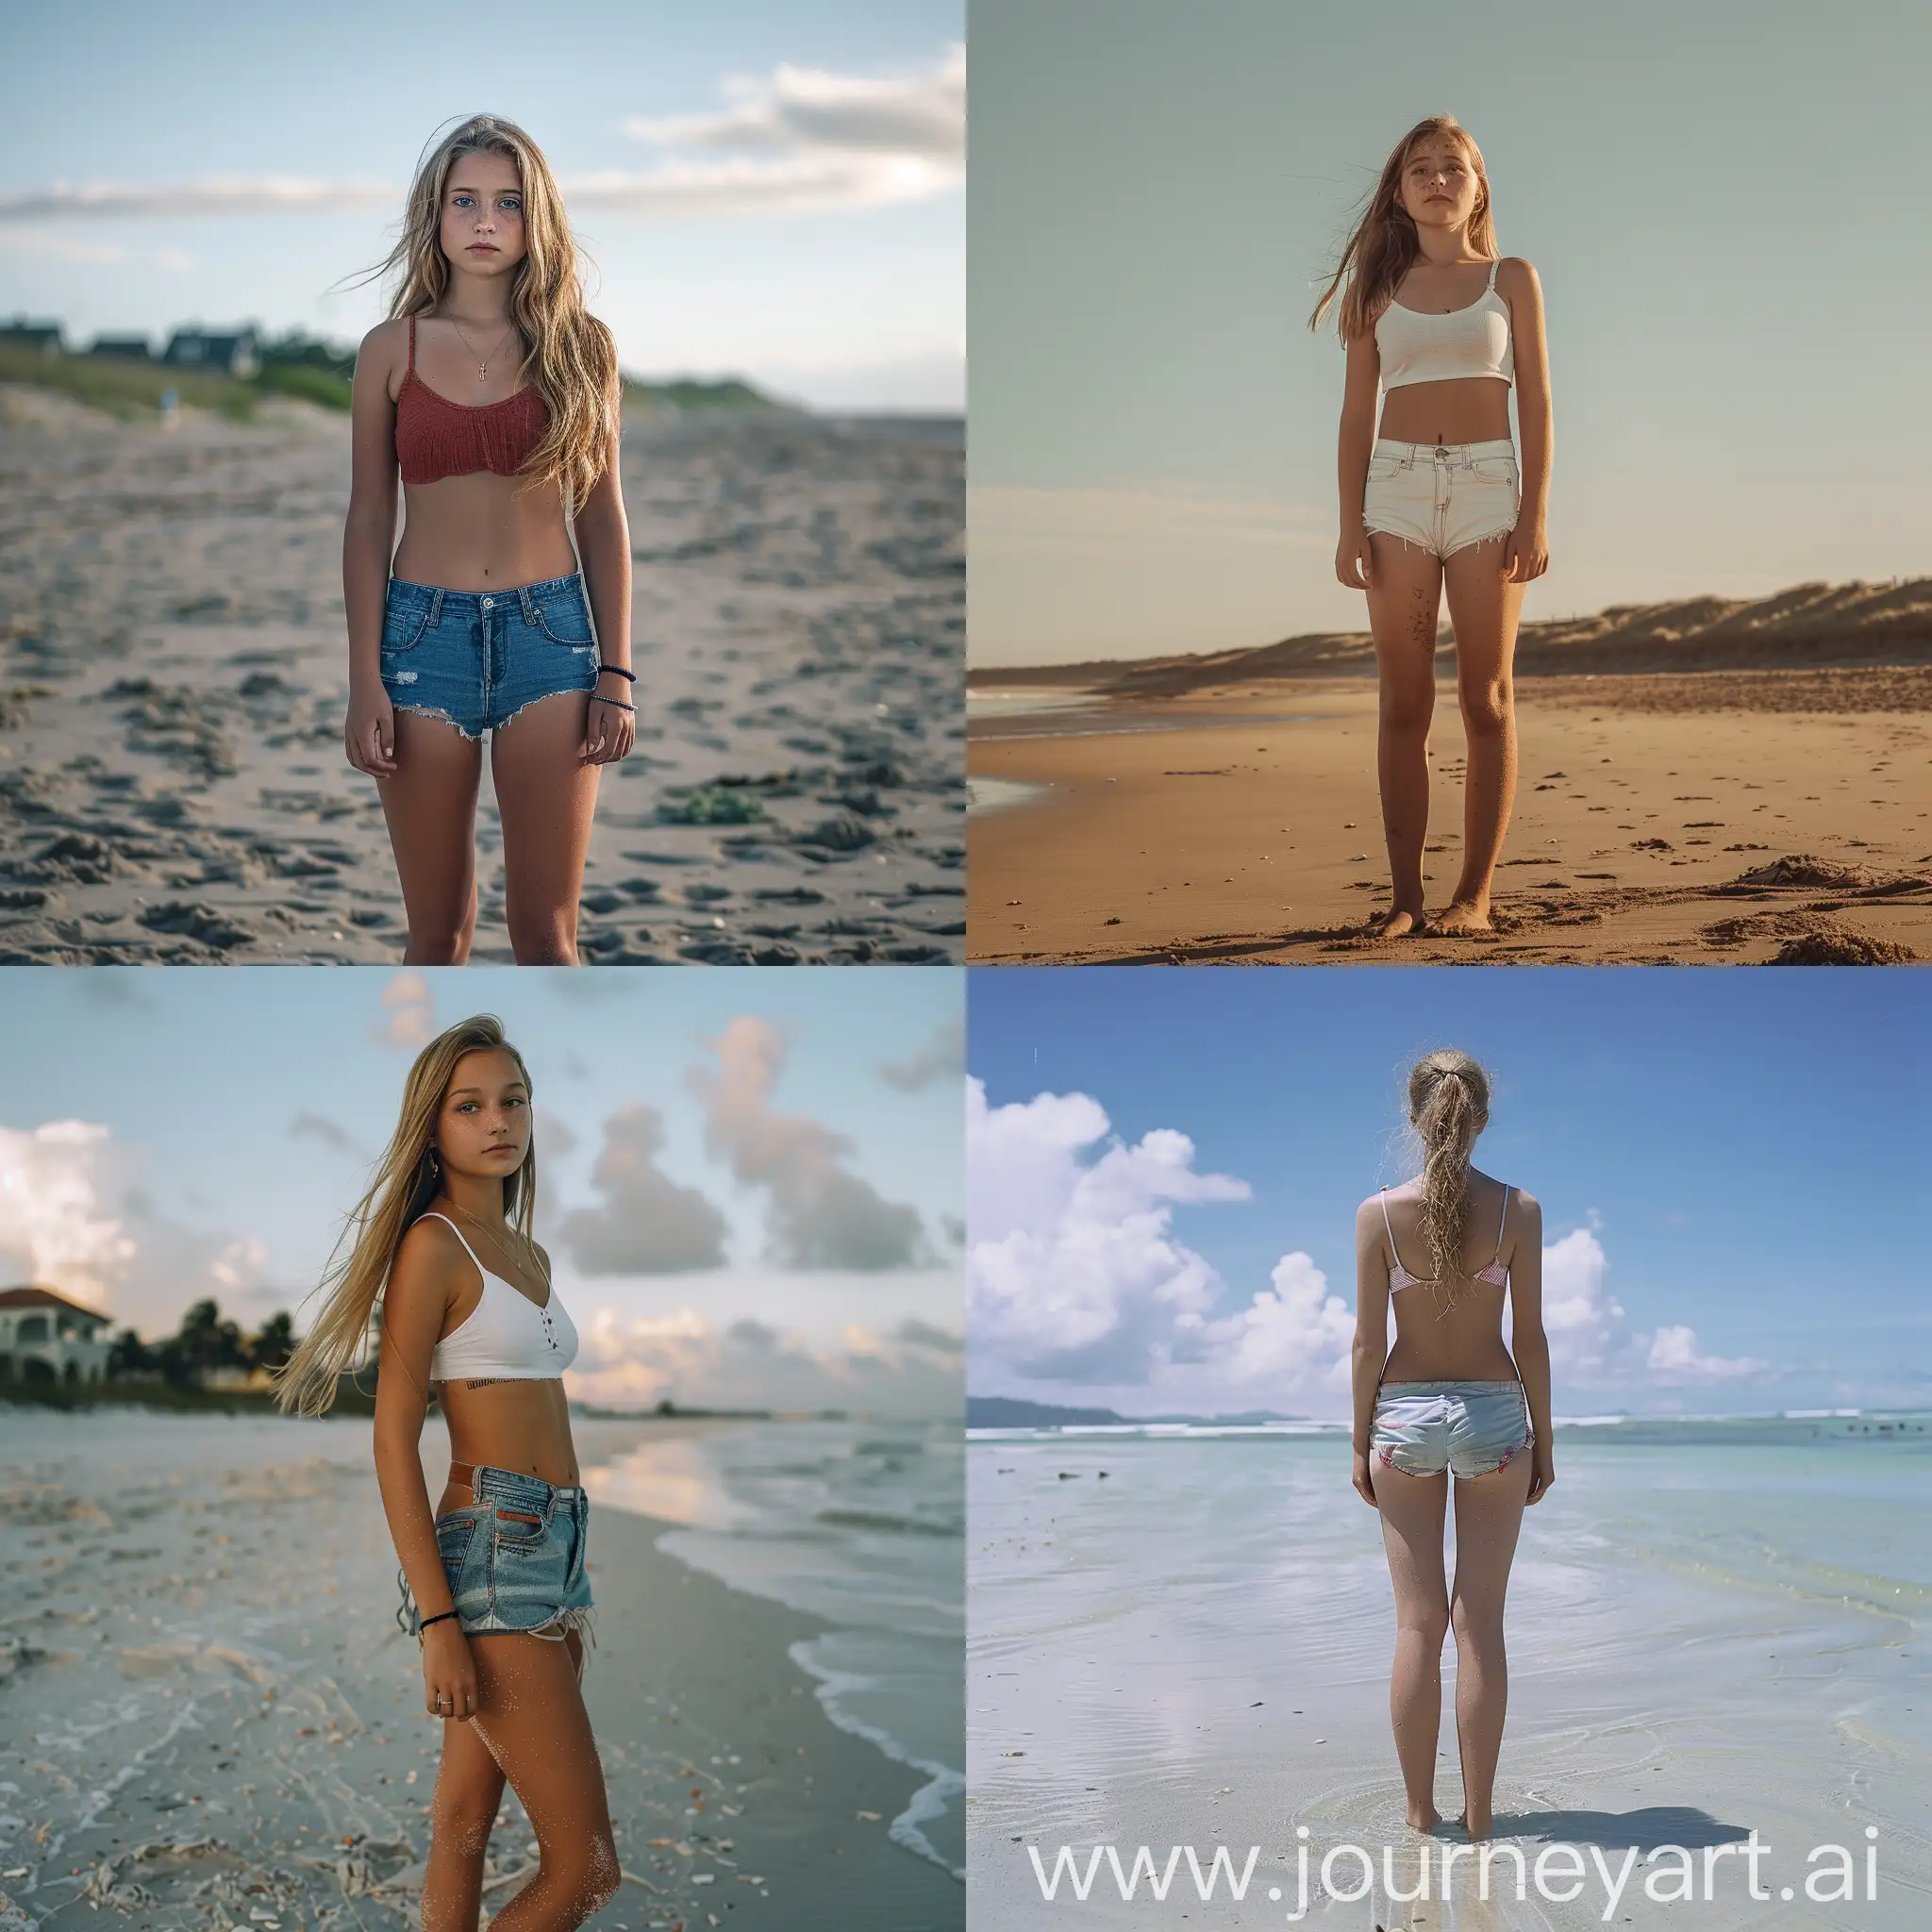 Full-Body-Portrait-of-a-Female-Teenager-Standing-on-a-Beach